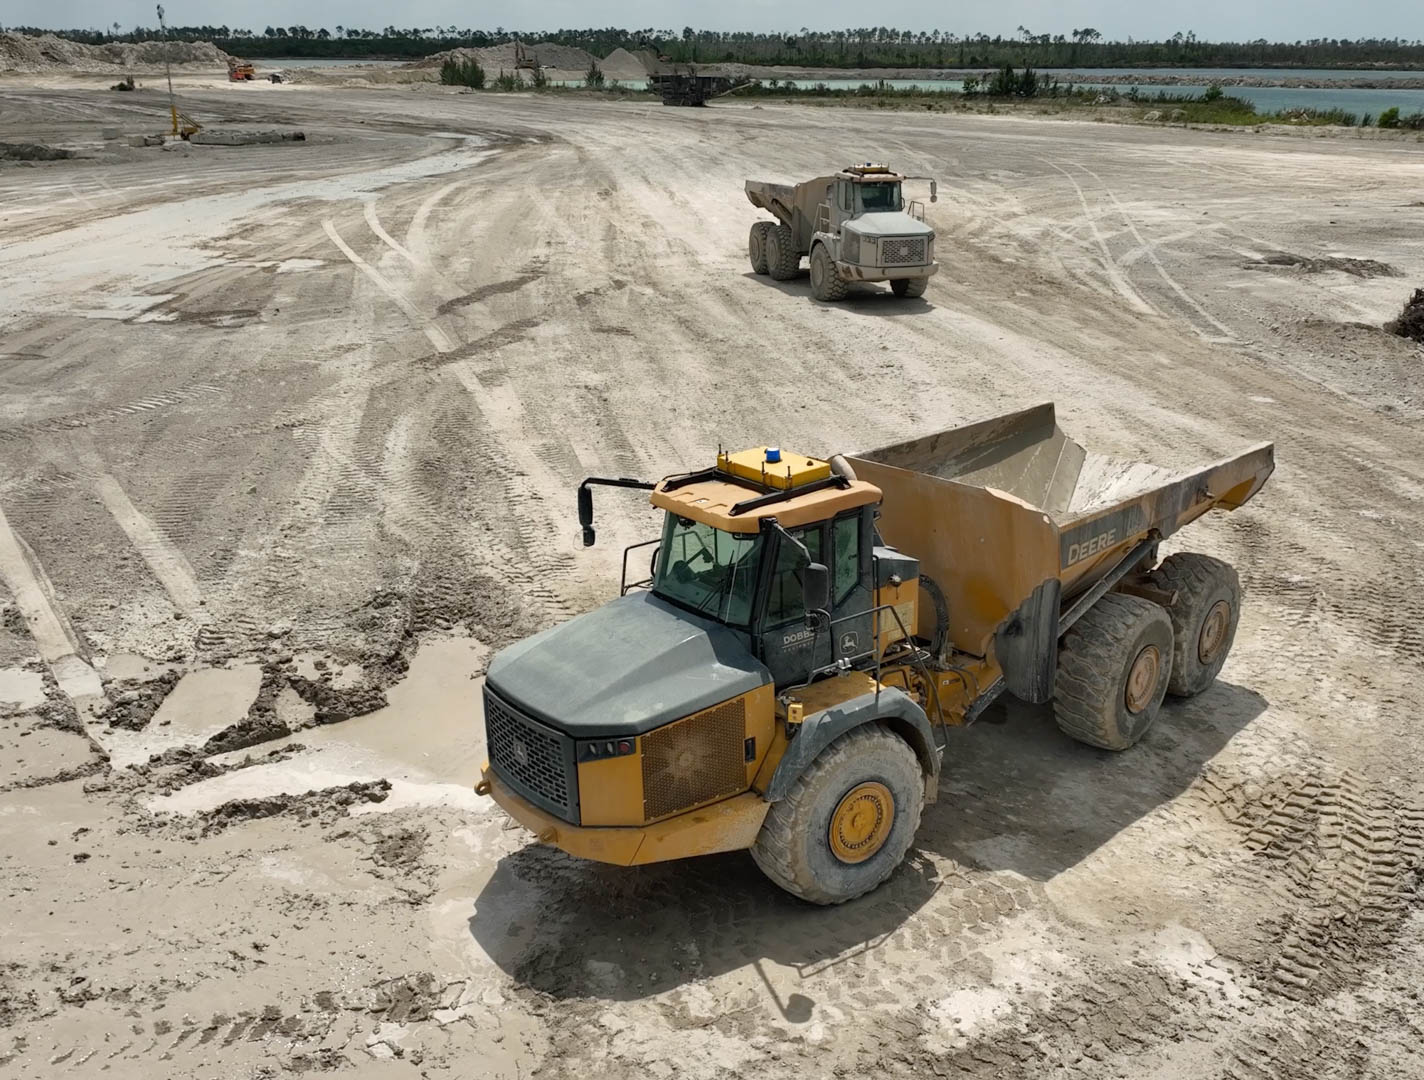 Watch a Construction Crew Operate Heavy Equipment by Remote Control